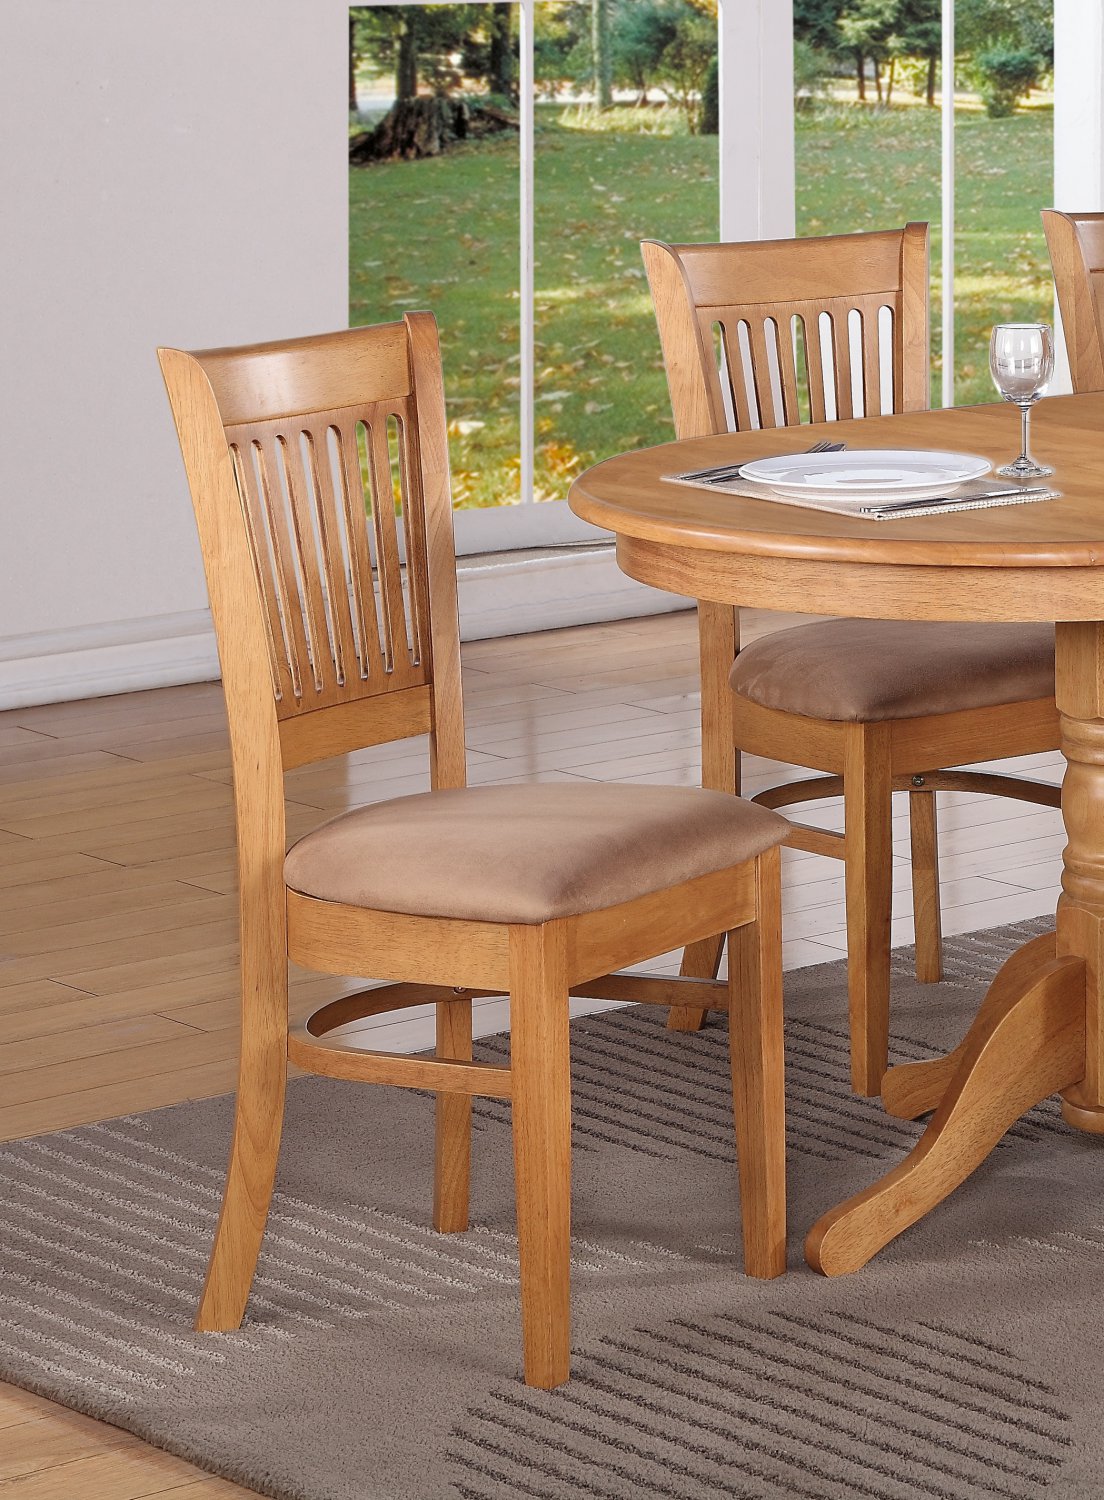 Simple Kitchen And Dining Room Chairs for Small Space